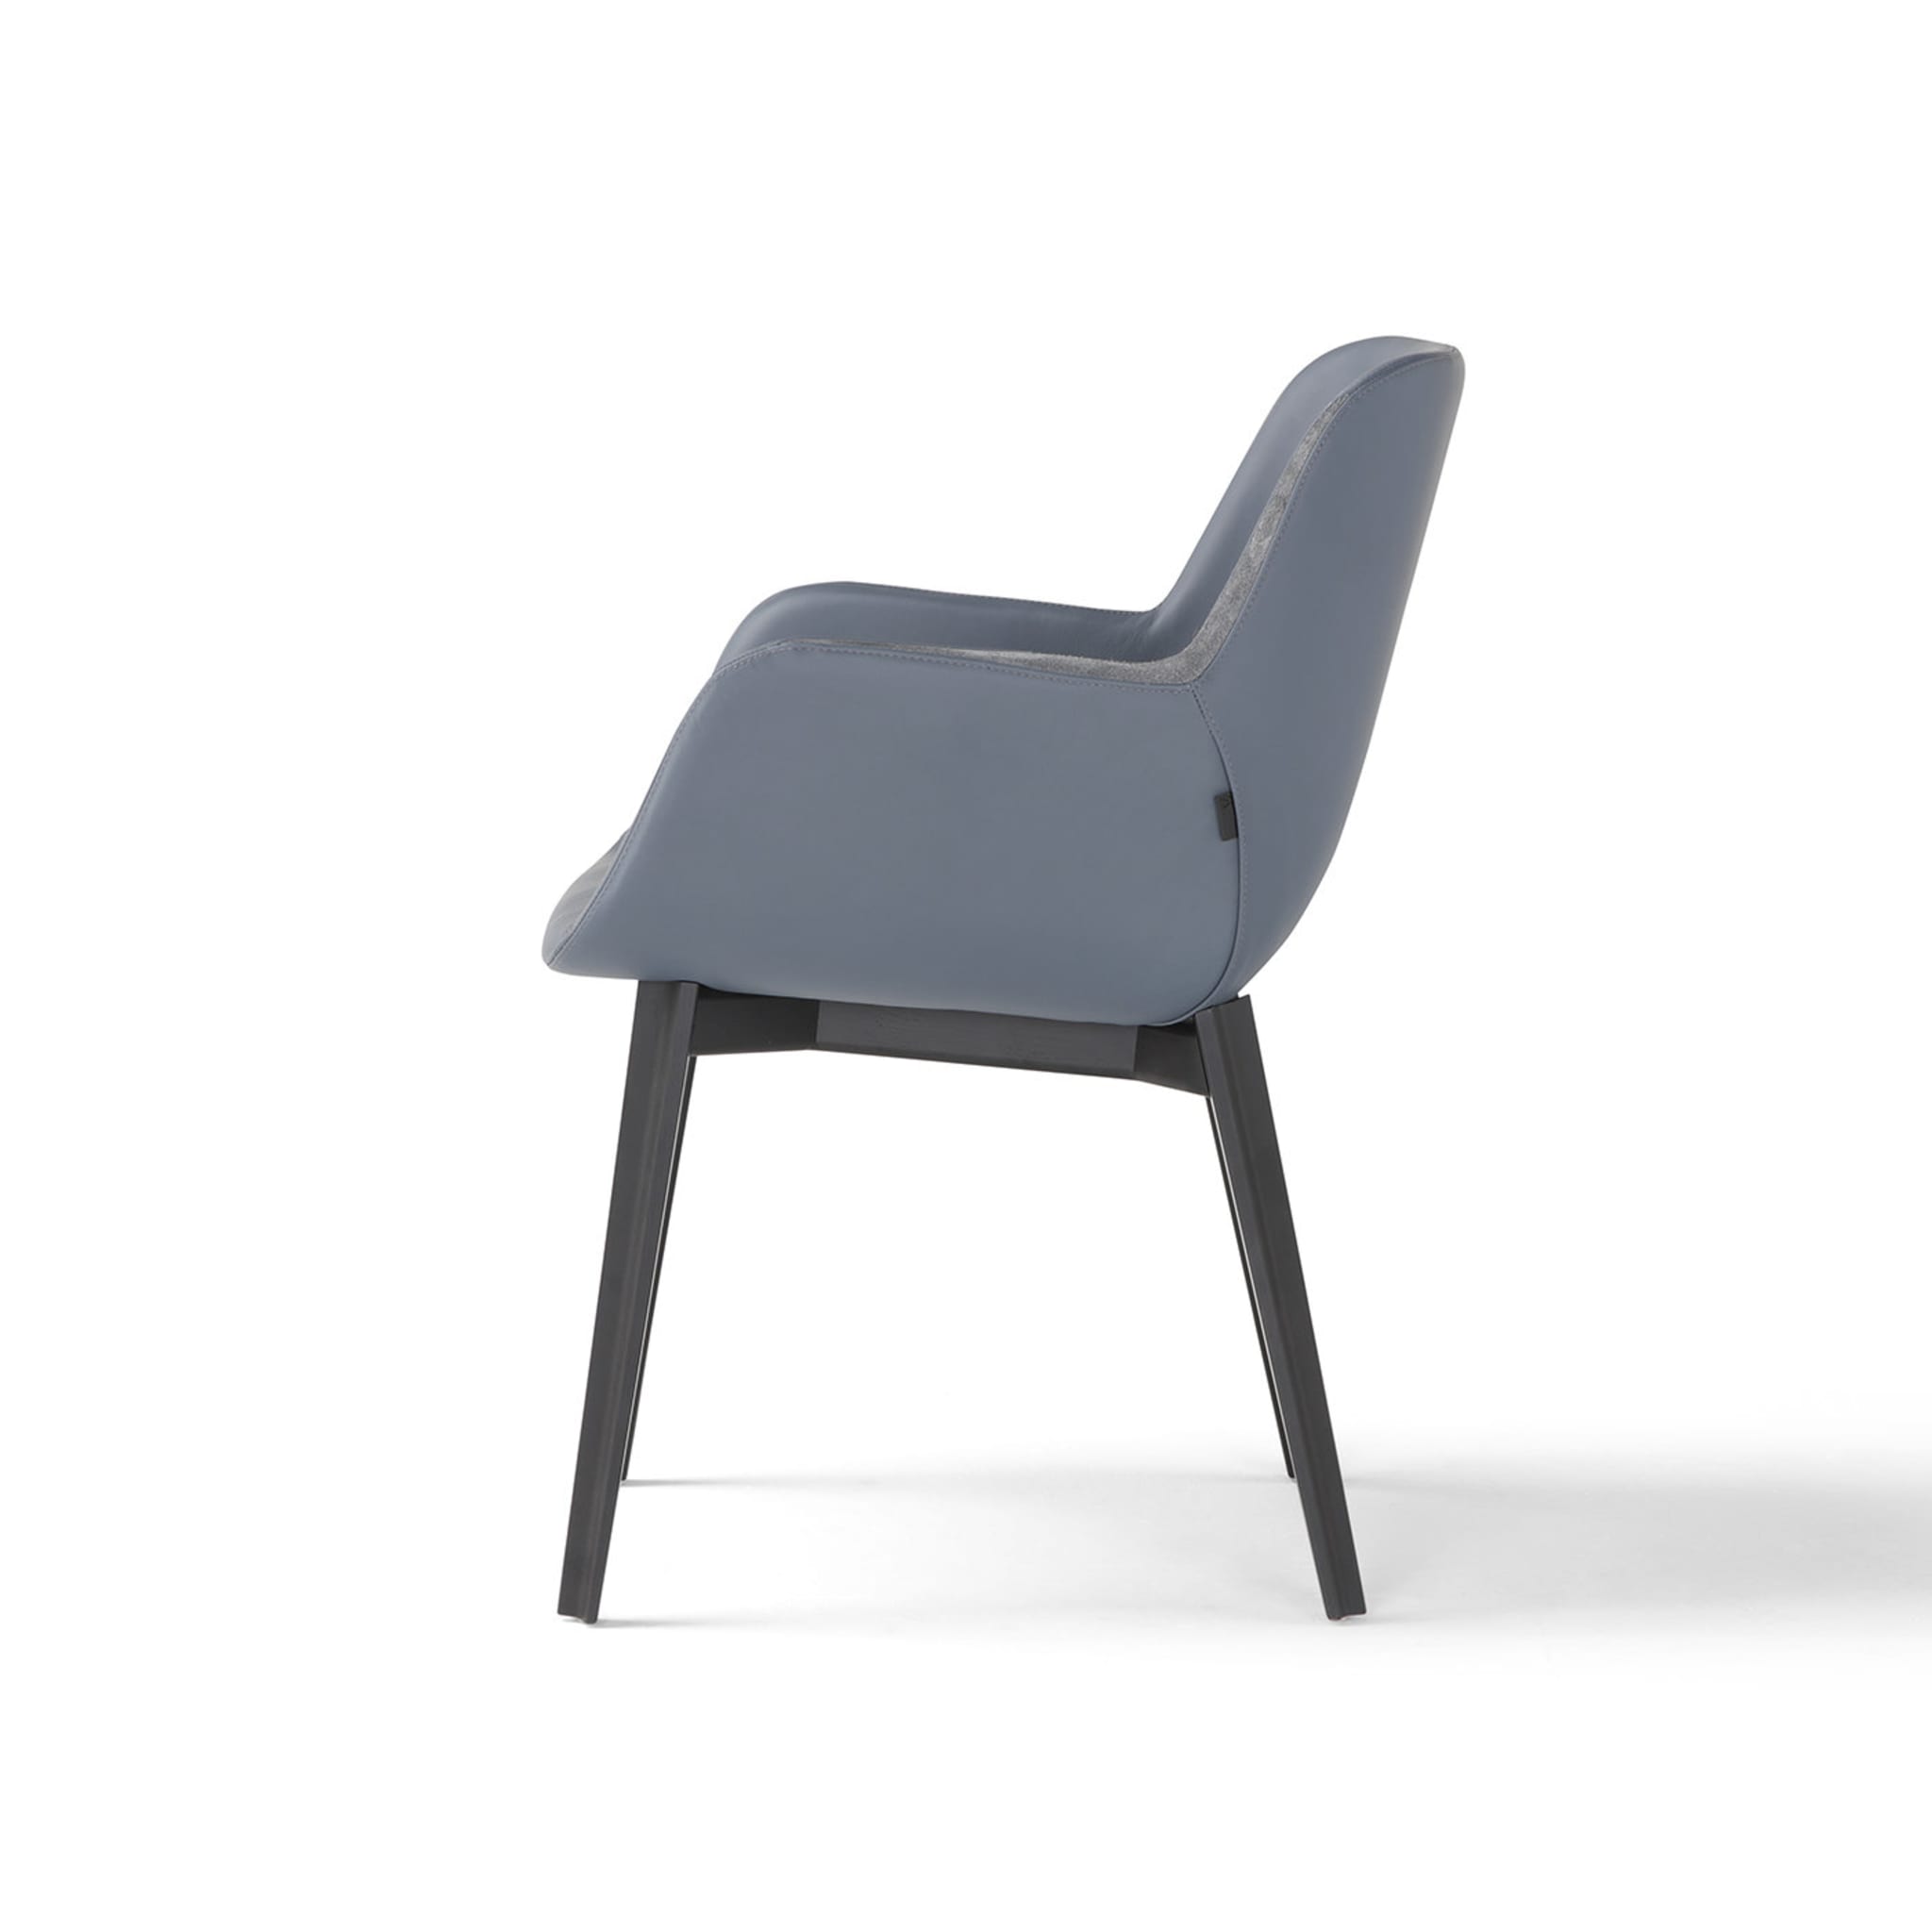 Panis Gray Leather Chair - Alternative view 2